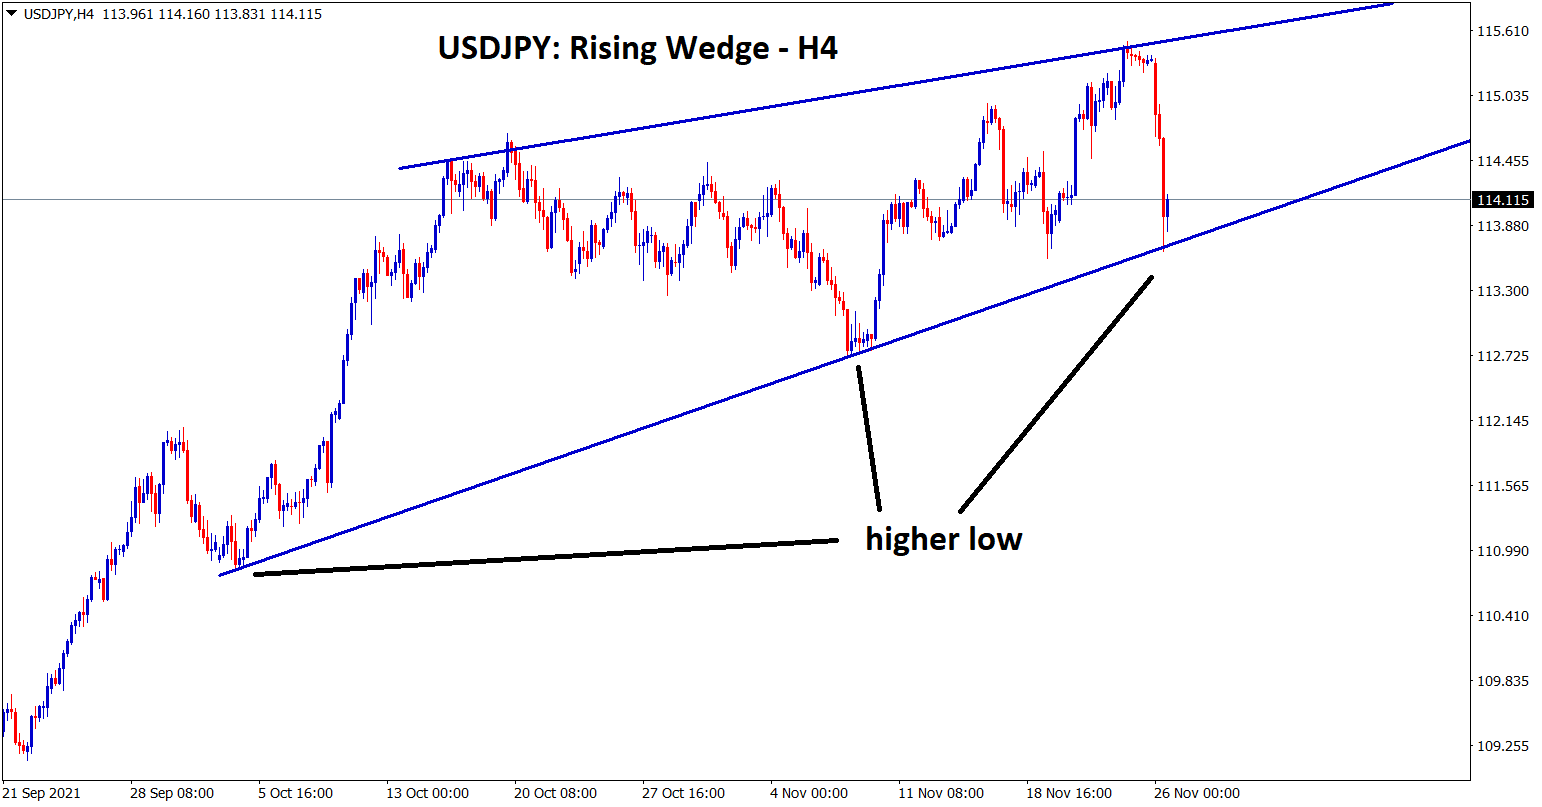 USDJPY is moving in a rising wedge pattern in the 4 hour timeframe chart